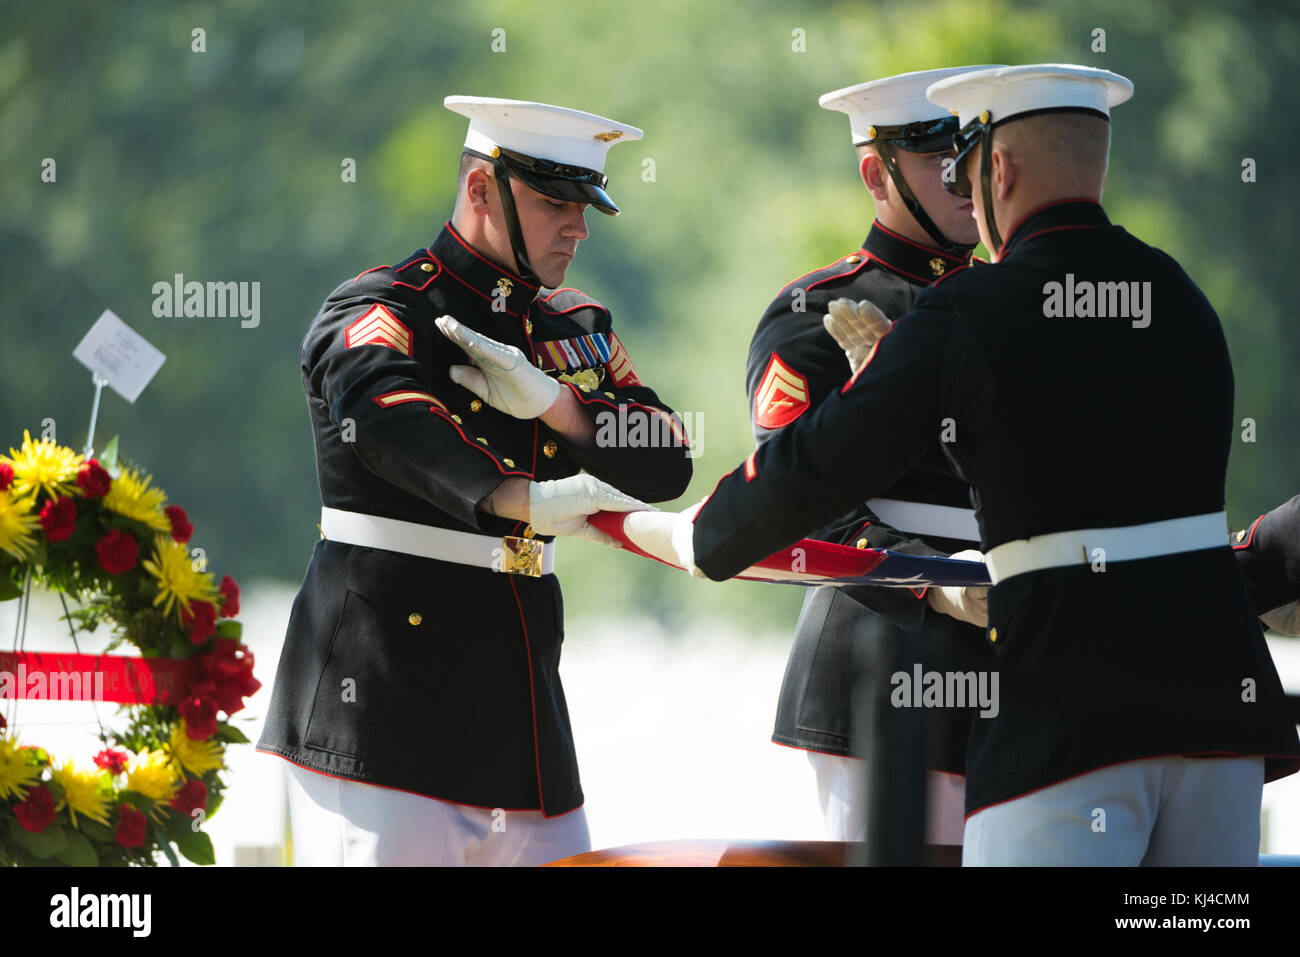 Full Honors Repatriation of U.S. Marine Corps Cpl. Walter G. Critchley at Arlington National Cemetery (37111467723) Stock Photo